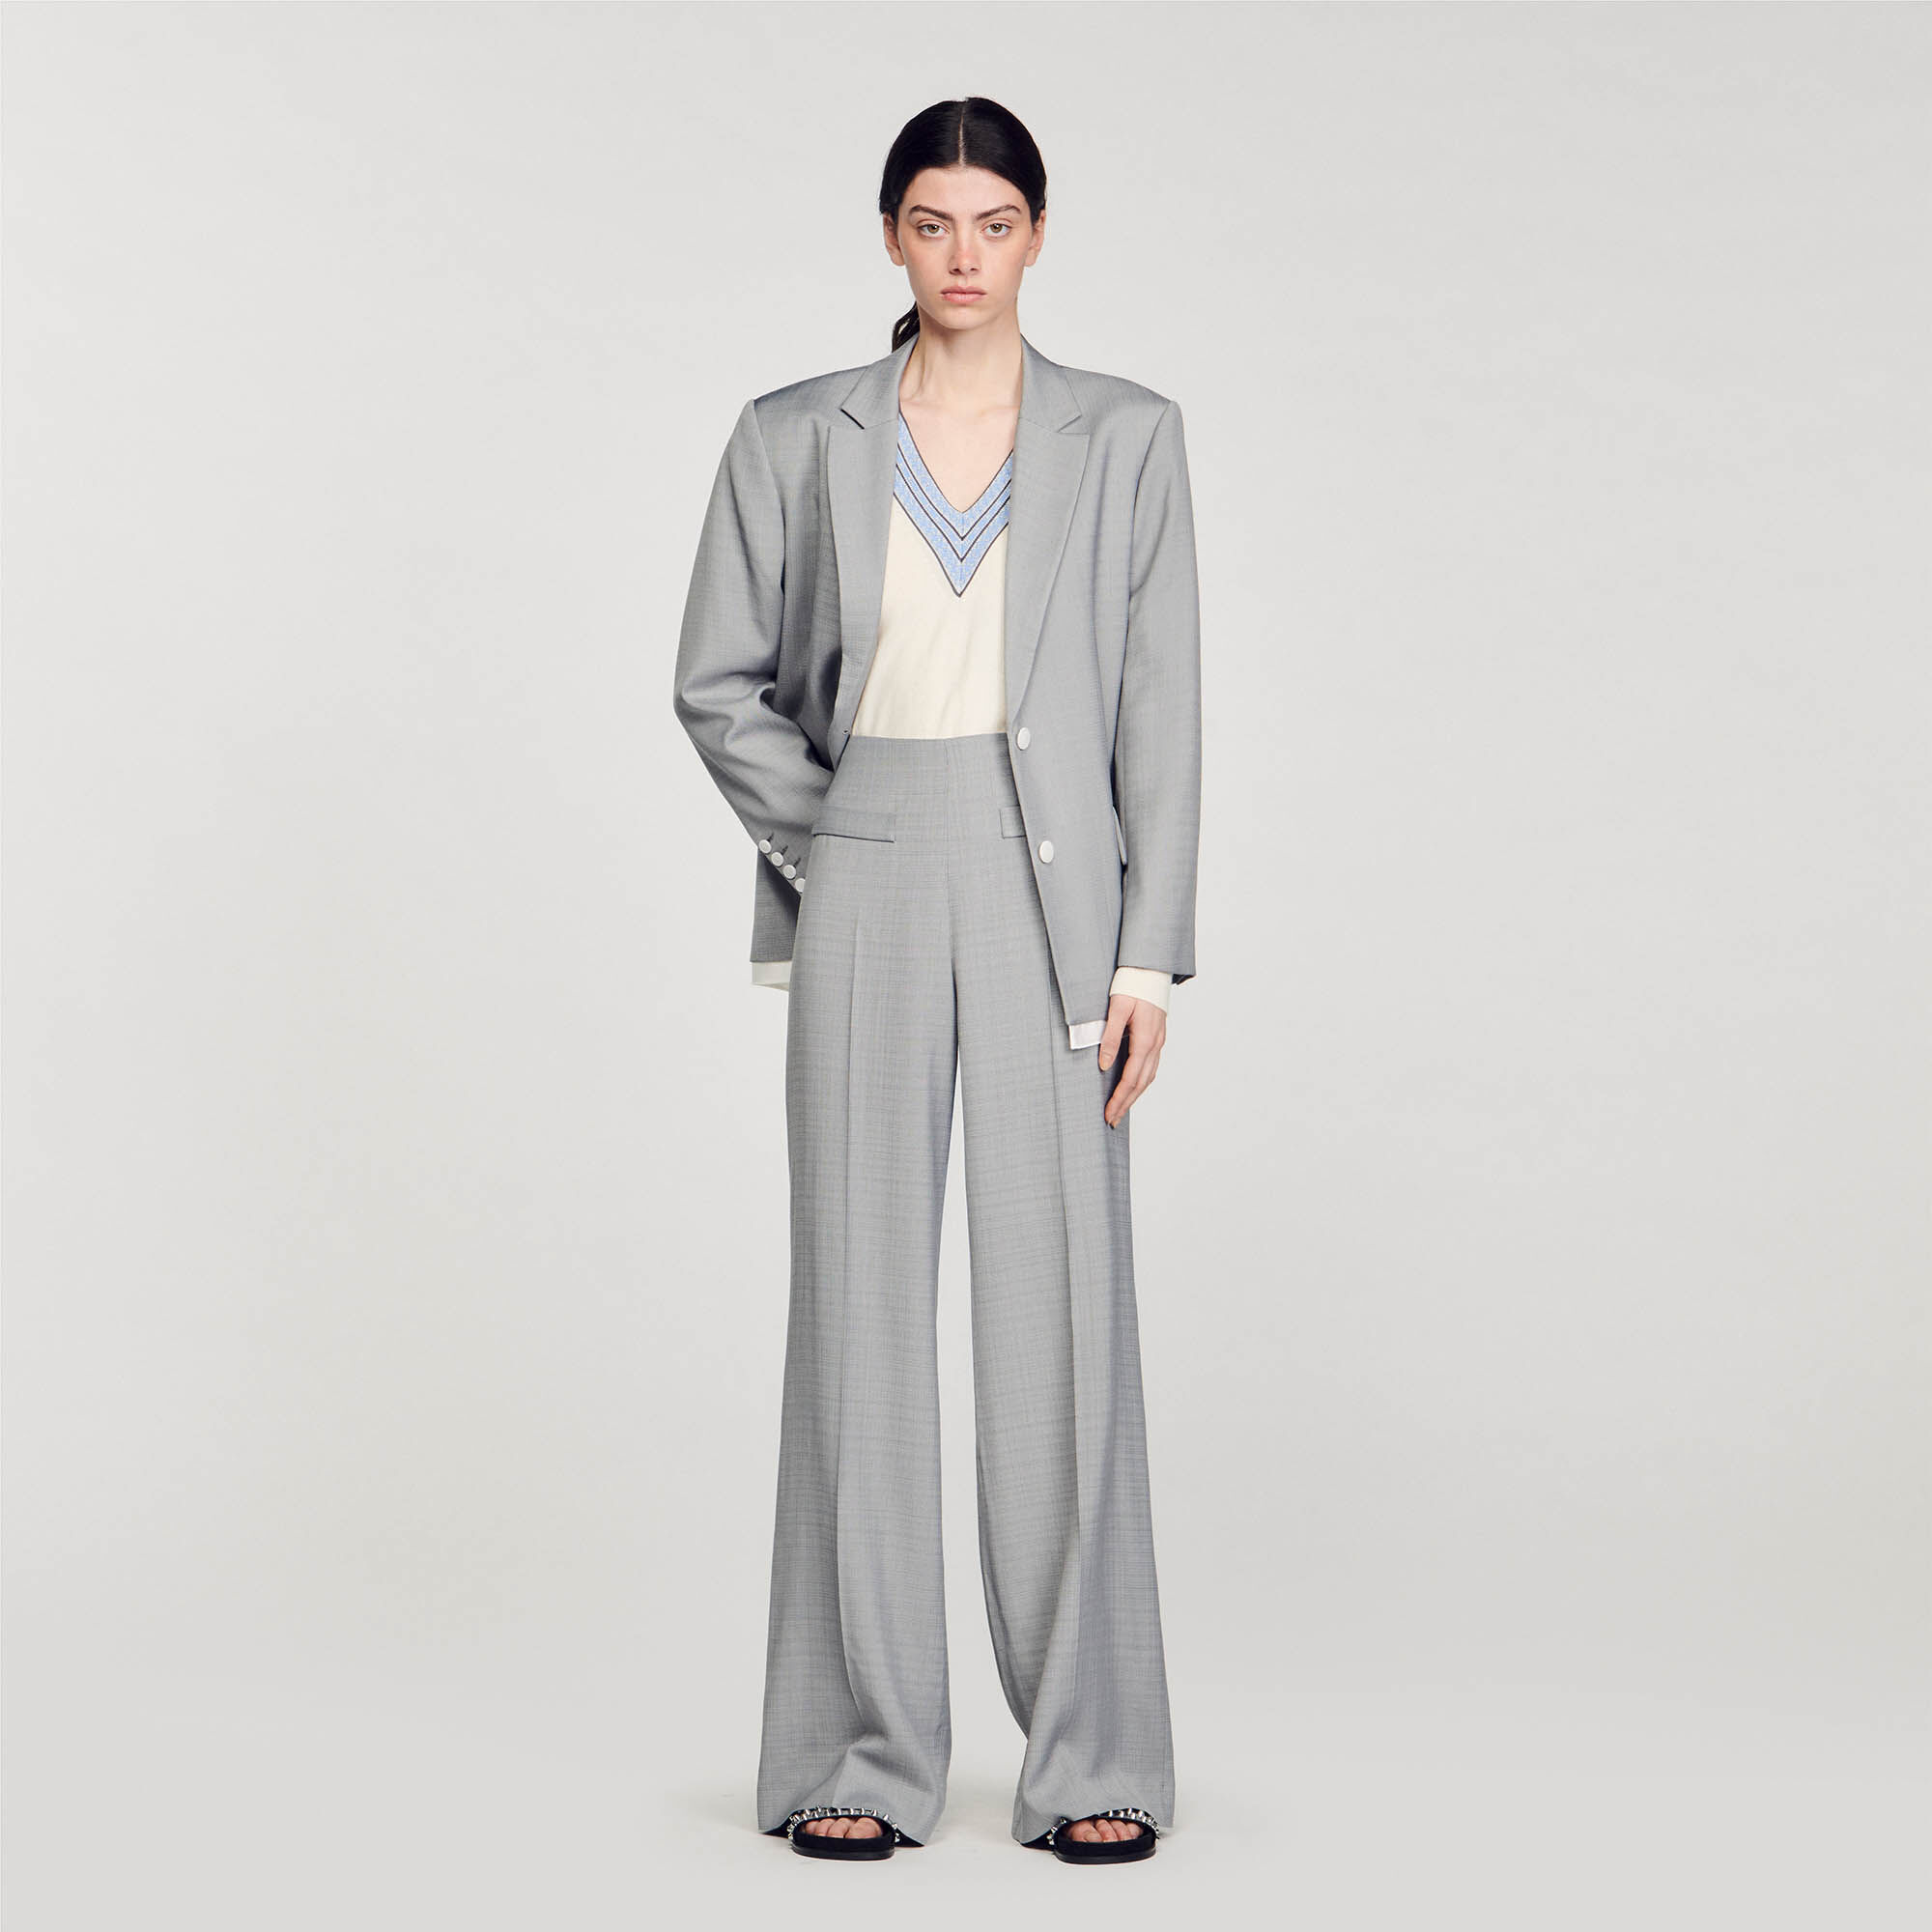 Spring 2020 Men's Flared Trousers Formal Pants Bell Bottom Pant Dance White  Suit Pants Size 28-30 31 32 33 34 36 37